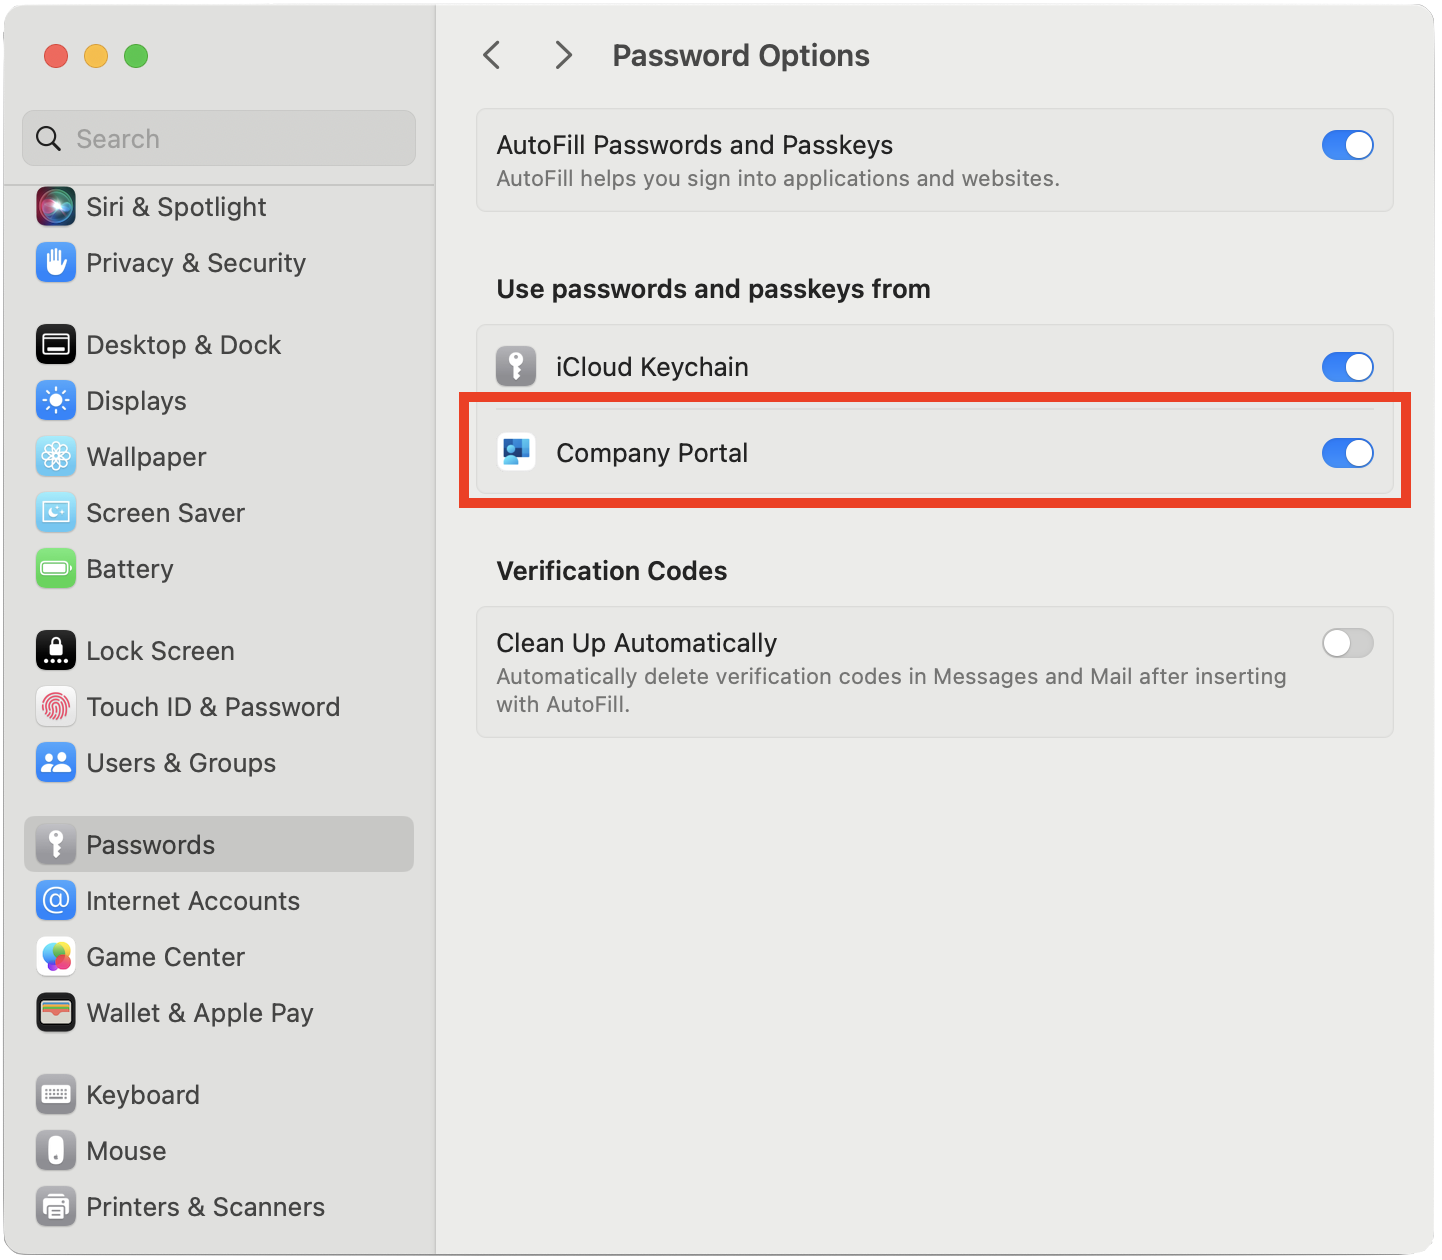 Screenshot of the Password Options window indicating that the use of passwords and passkeys from Company Portal has been enabled by a switch.